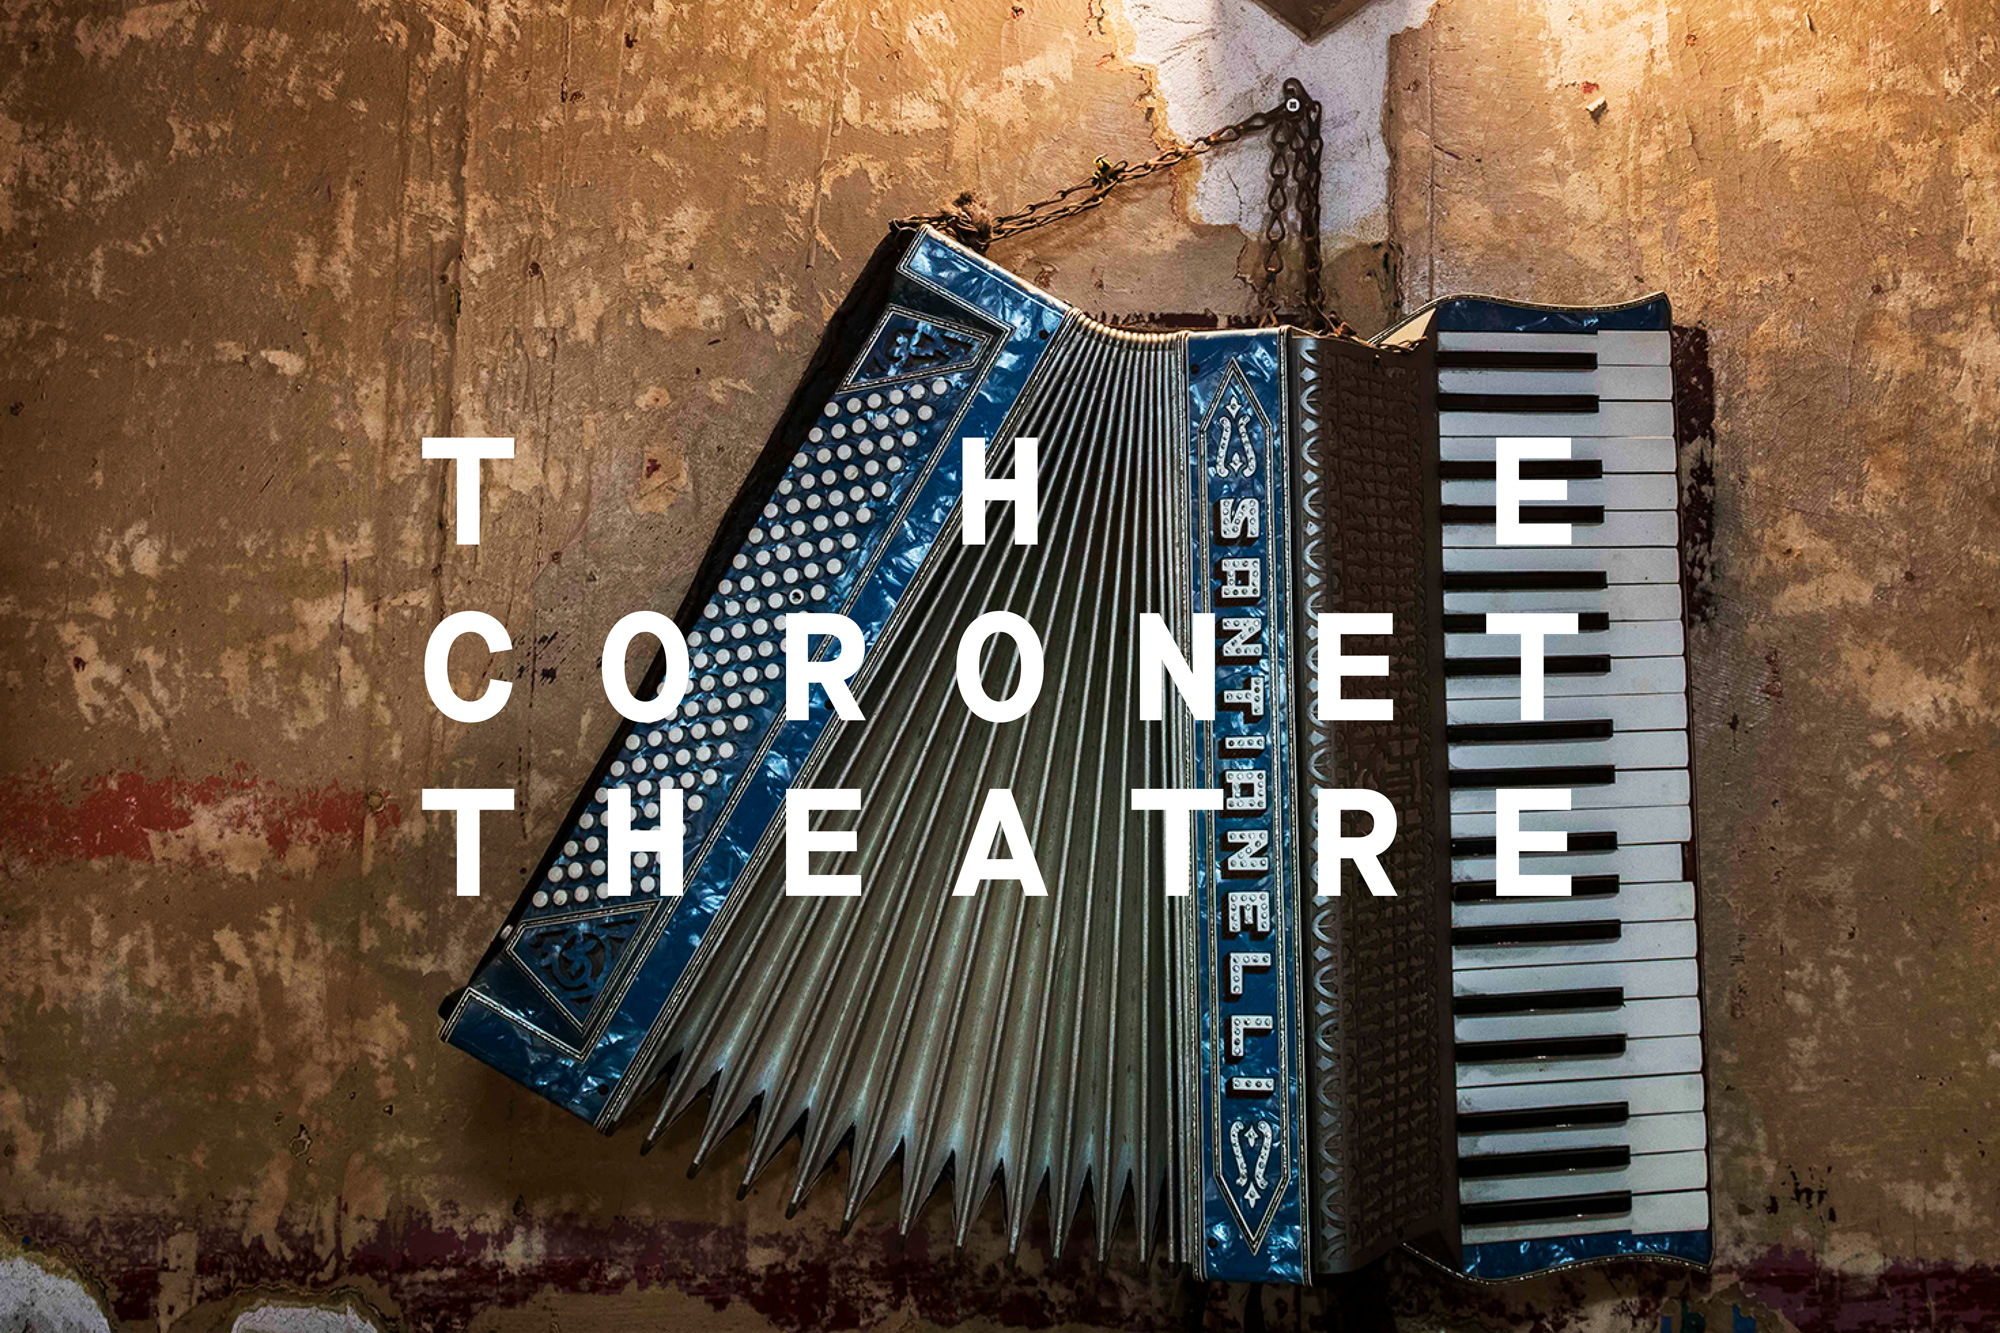 New Logo and Identity for The Coronet Theatre by North